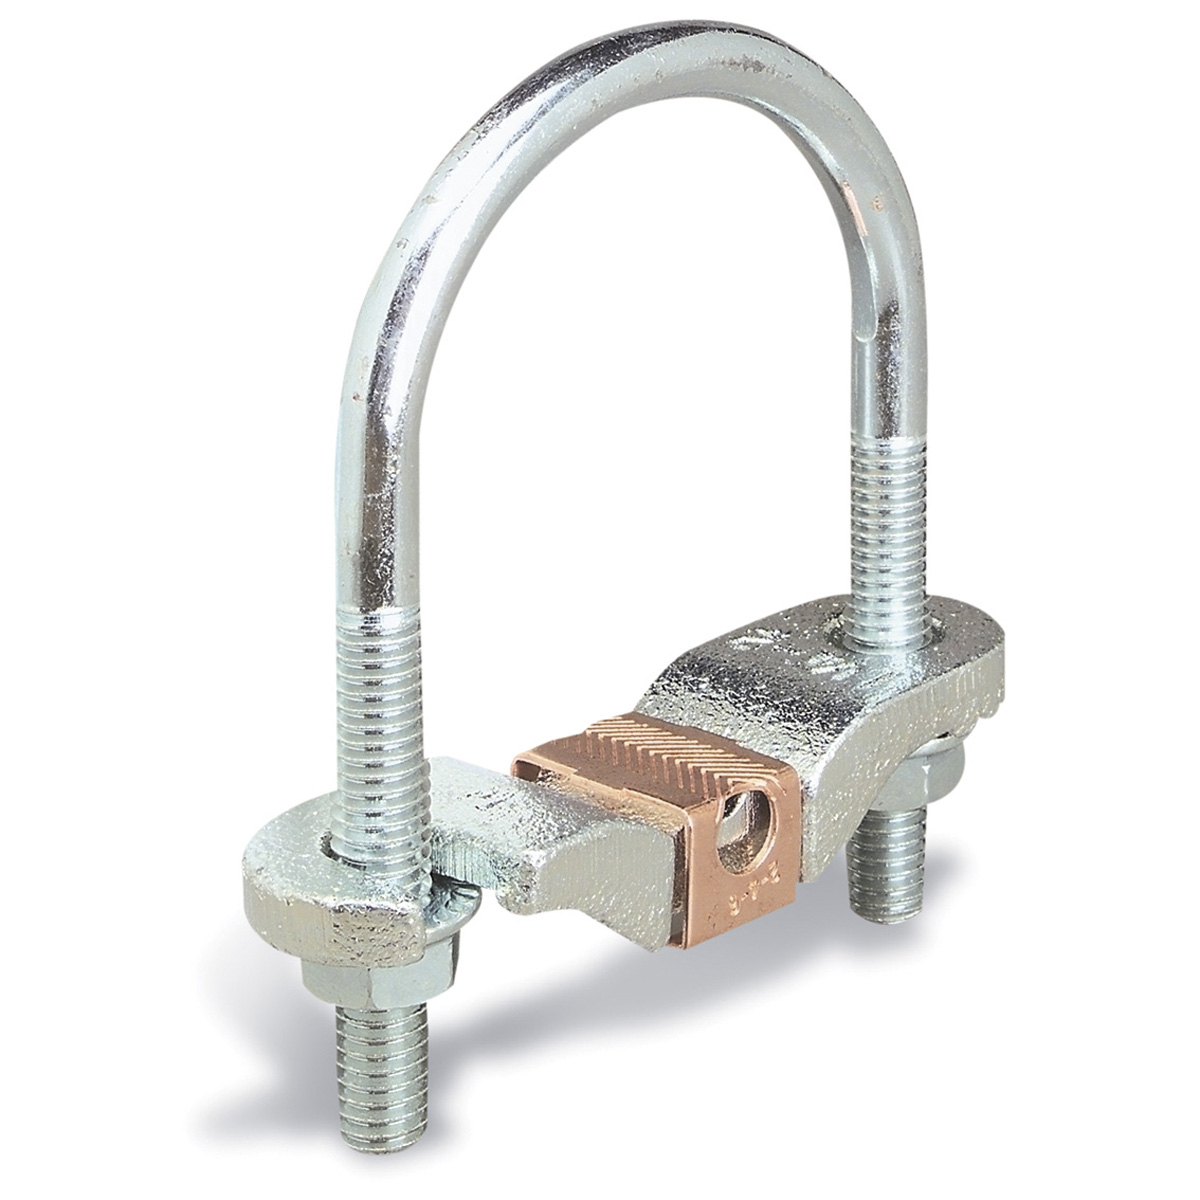 GRND G-6 GROUND ROD CLAMP STANDARD DUTY, 1/2 3/4 DIAMETER RODS 10 SOLID-2  STRANDED (CP34) - Gross Electric - Residential and Commercial Lighting  Solutions - Electrical Supply and Showroom